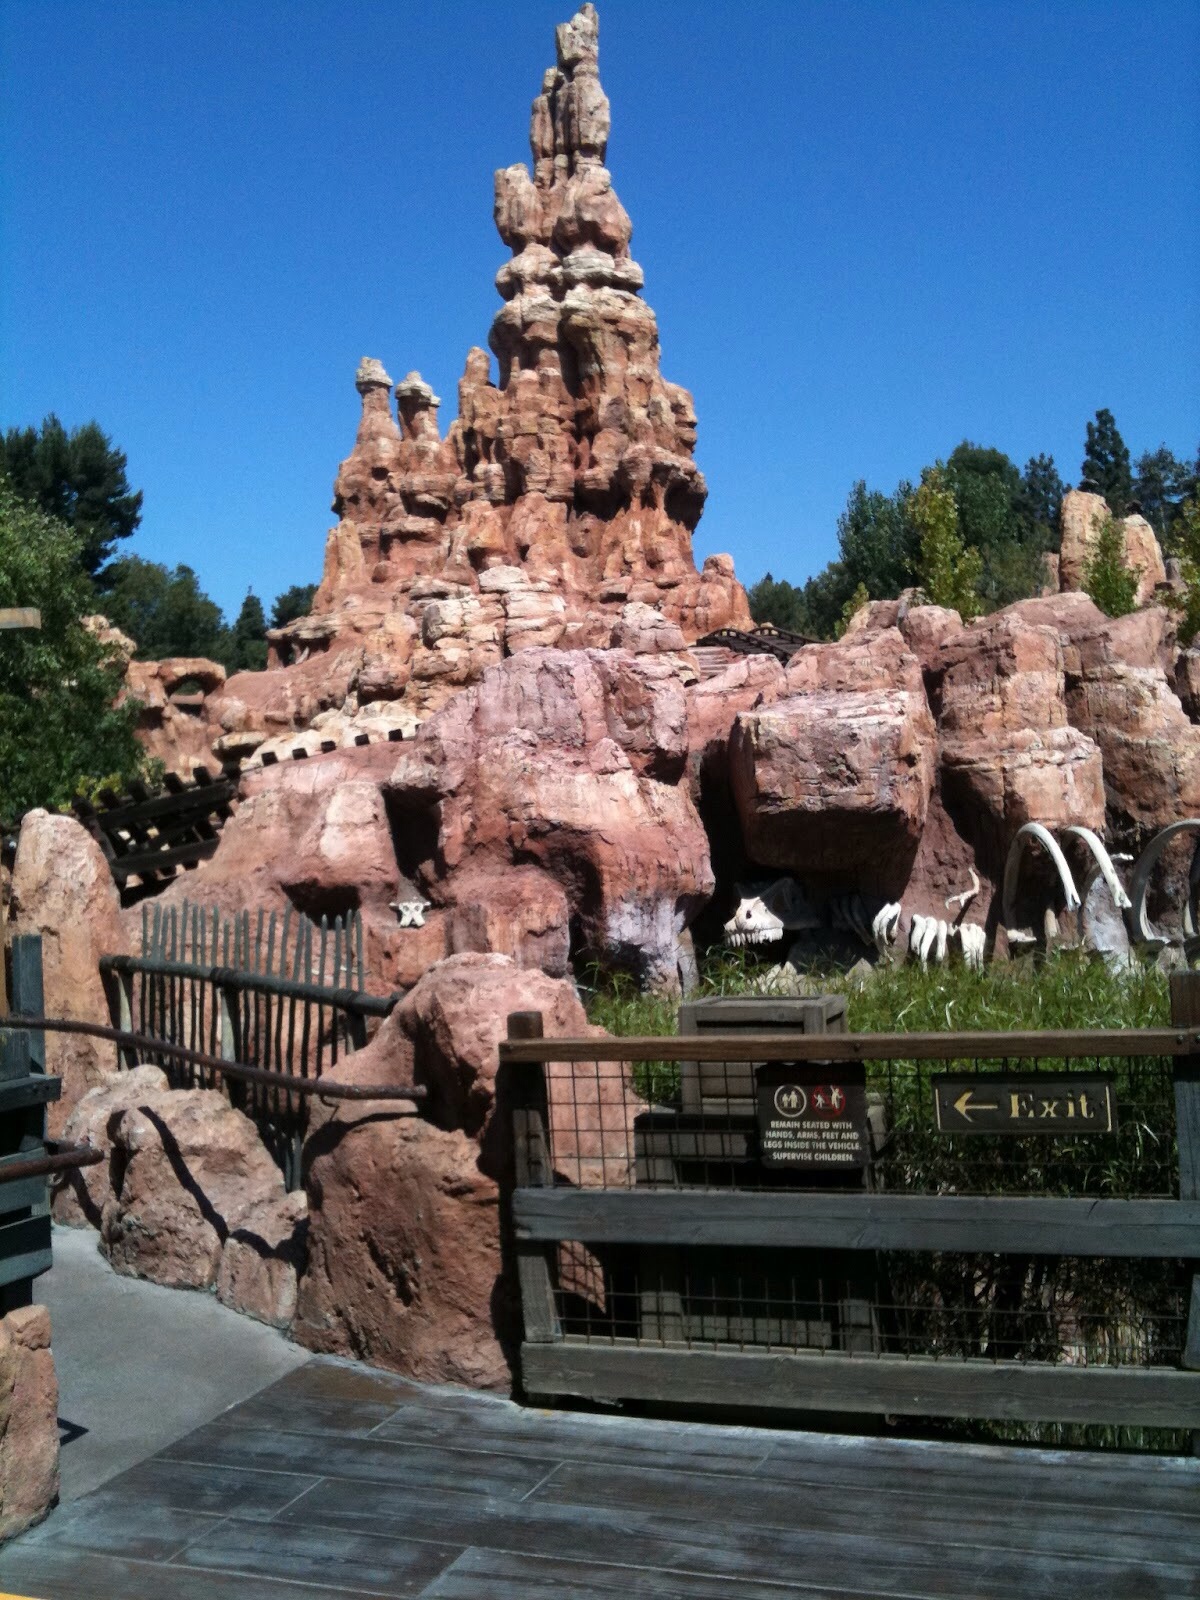 Disneyland's Big Thunder Mountain Railroad reopening is set for March 17